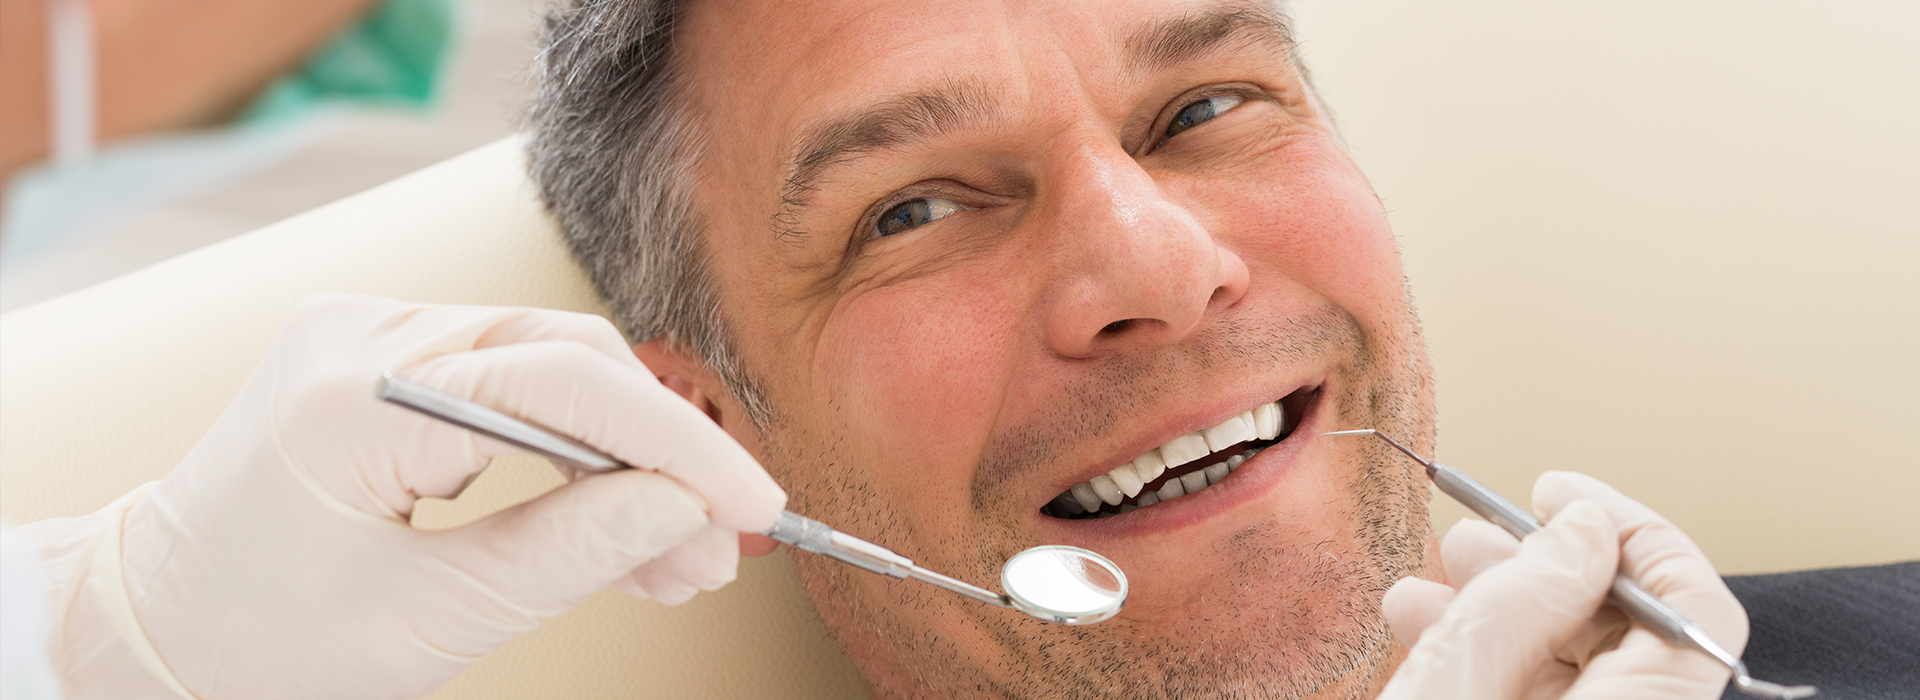 All About Smiles | Snoring Appliances, Dentures and Pediatric Dentistry